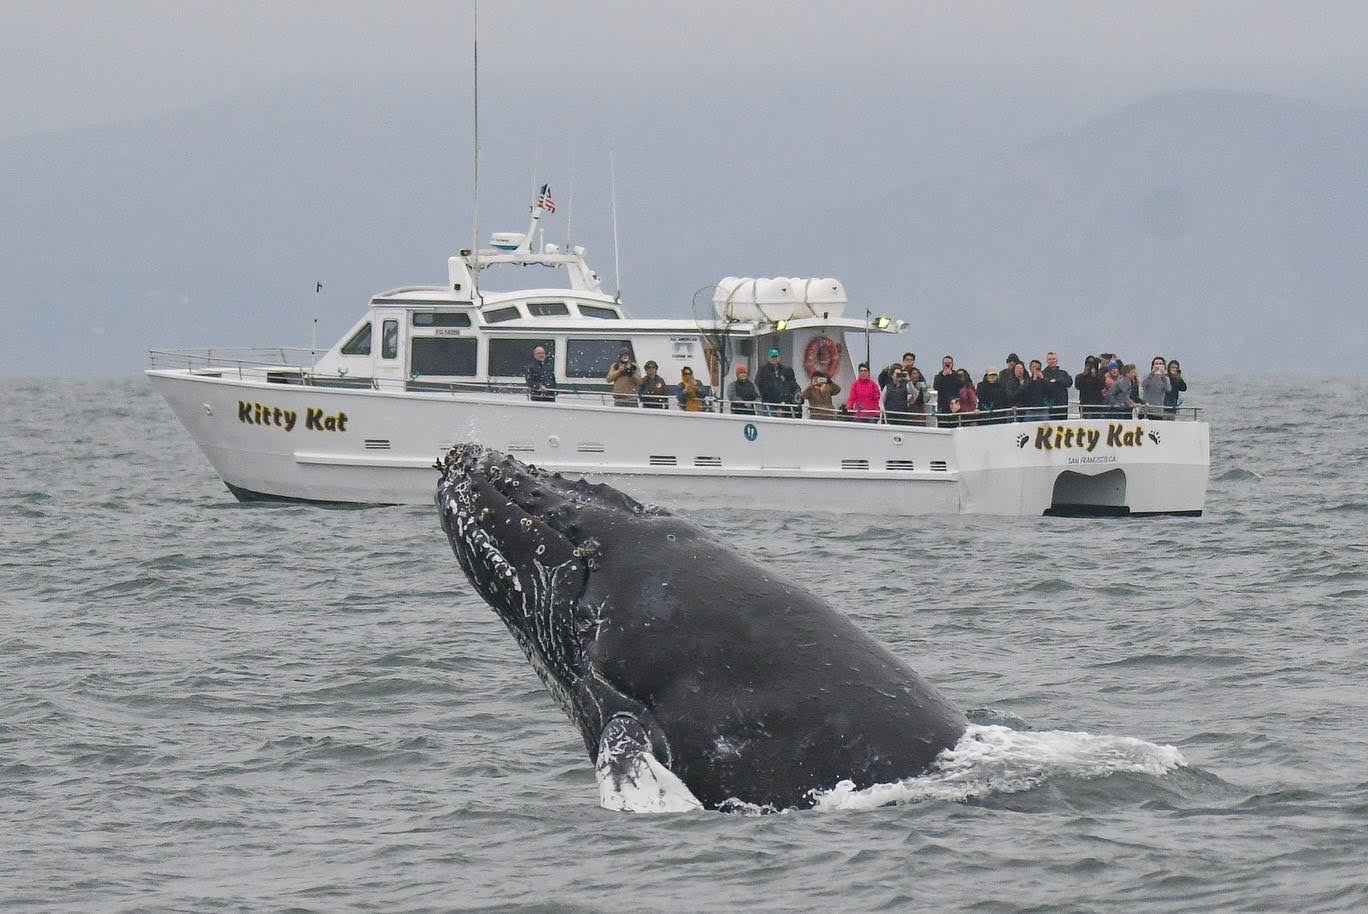 The front half of a whale's body emerges from water as a boat carrying passengers watches from a short distance.